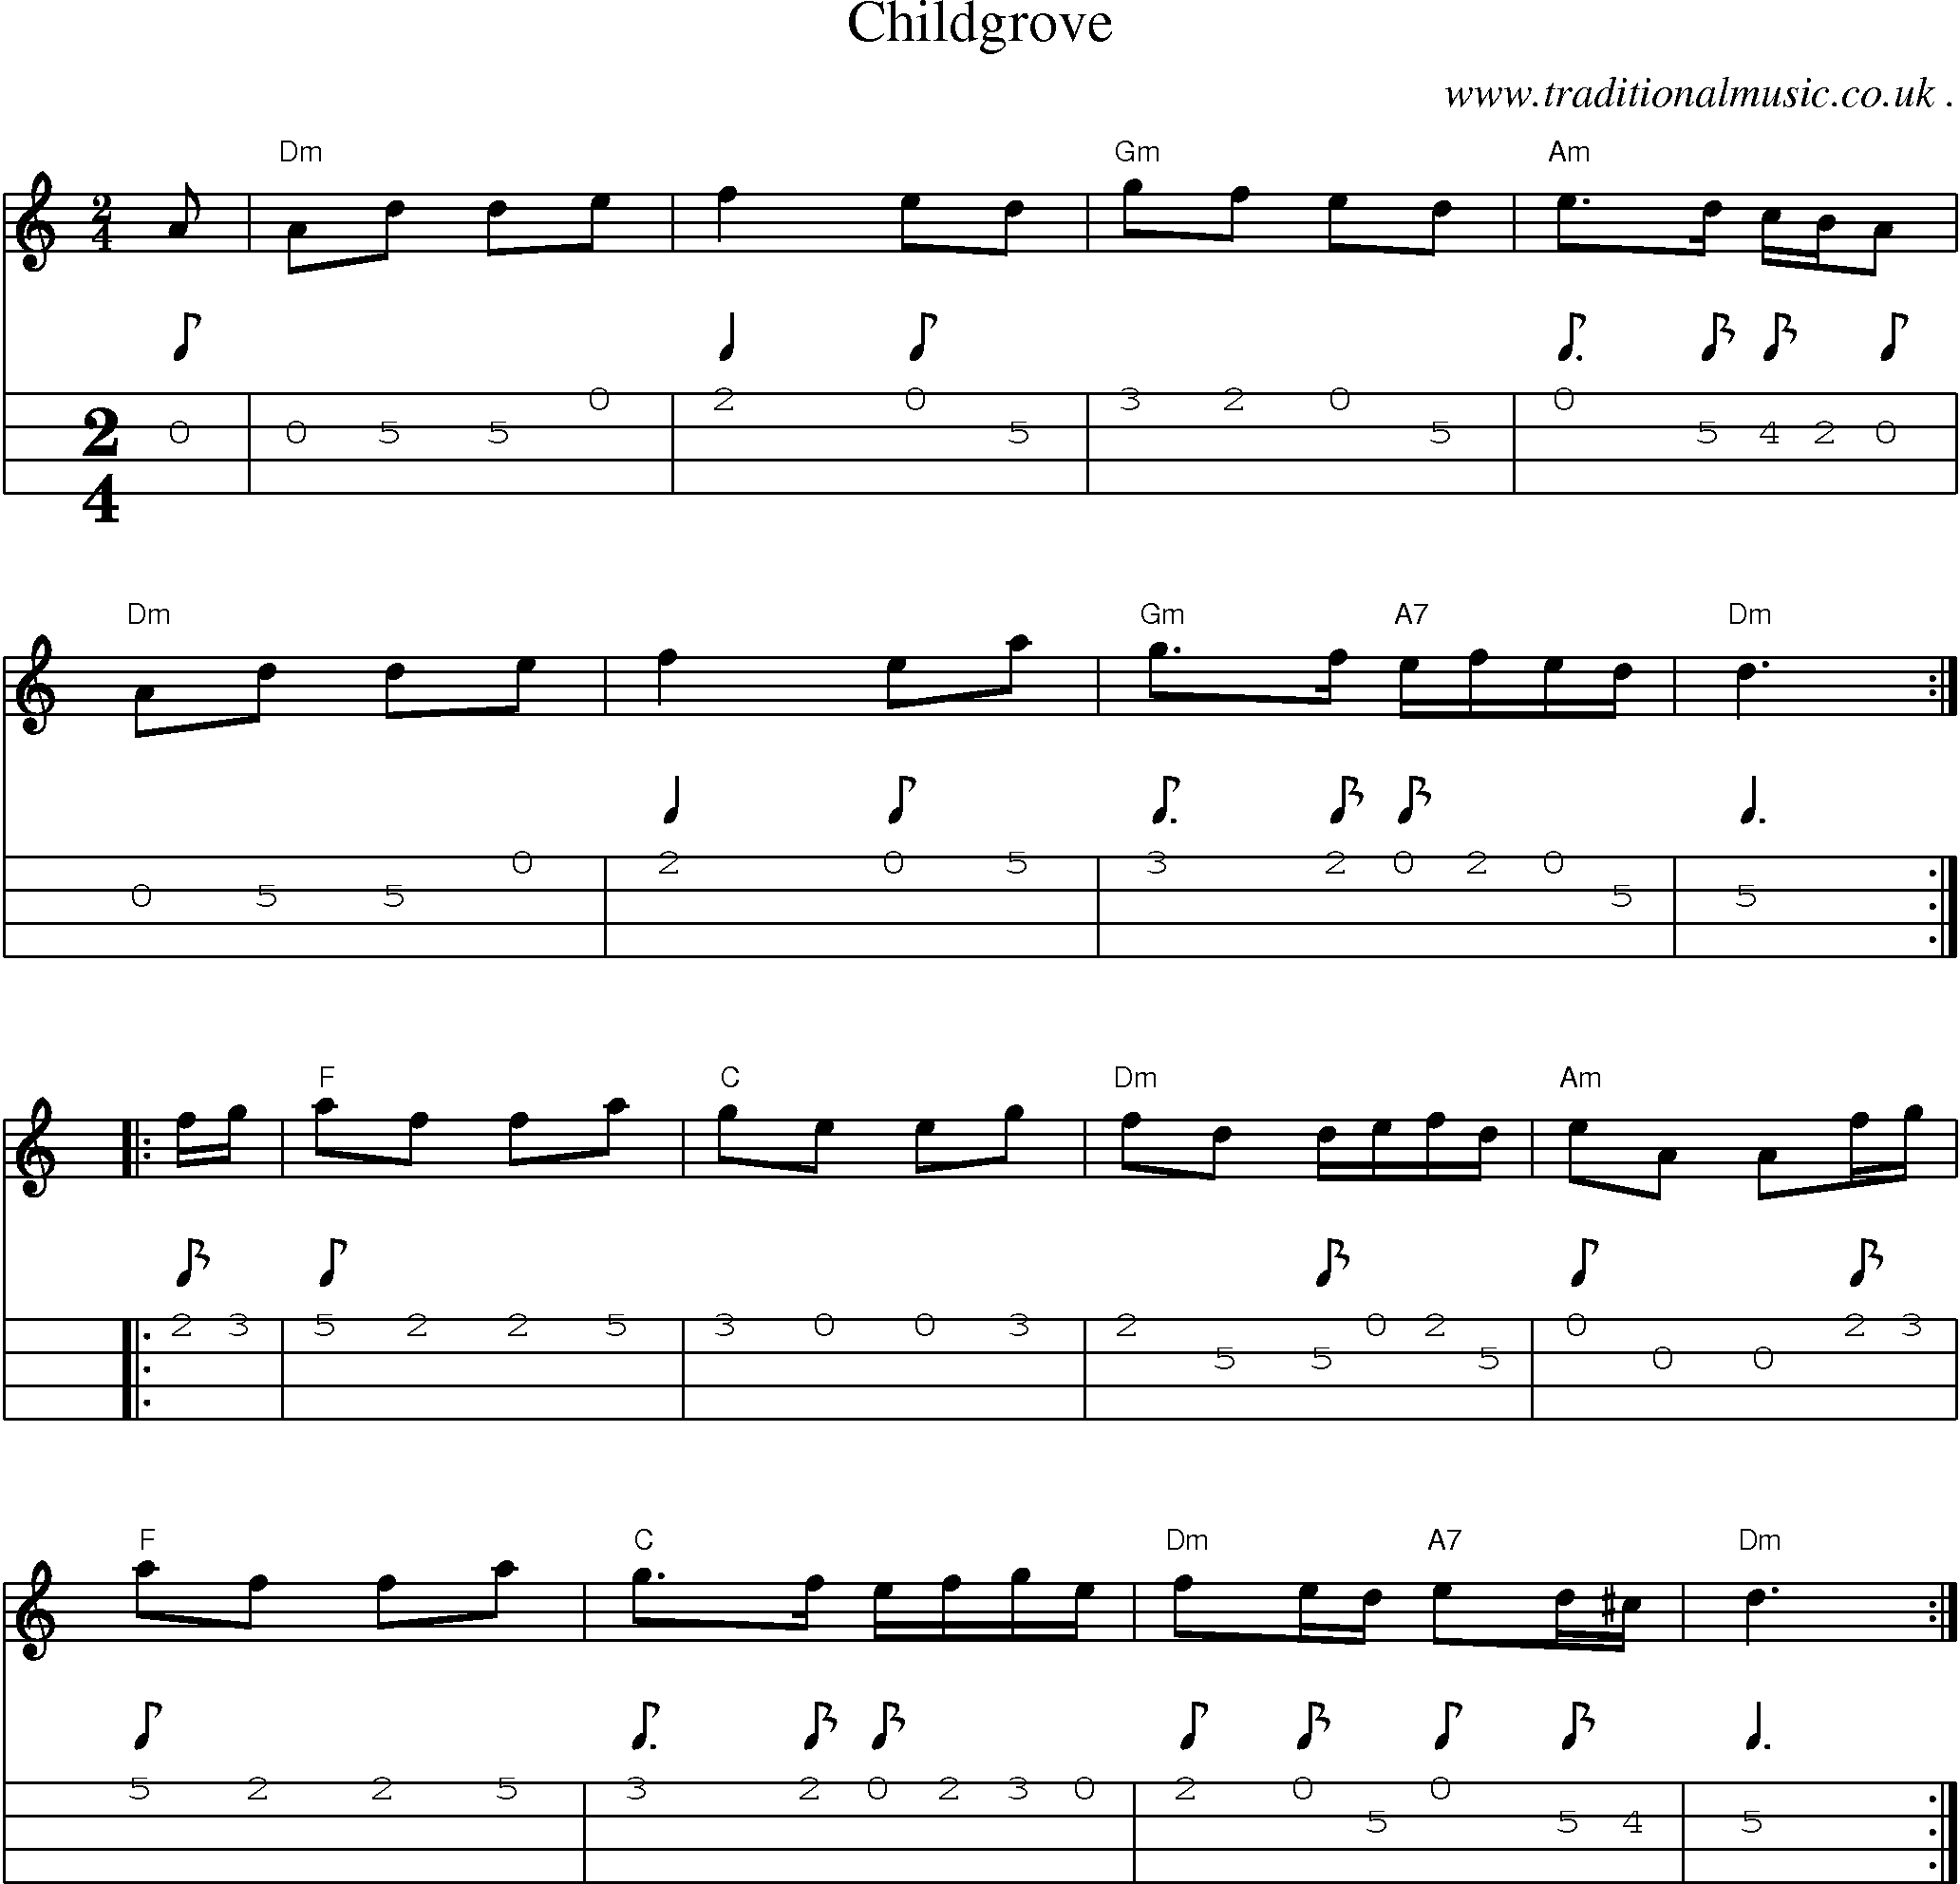 Music Score and Guitar Tabs for Childgrove